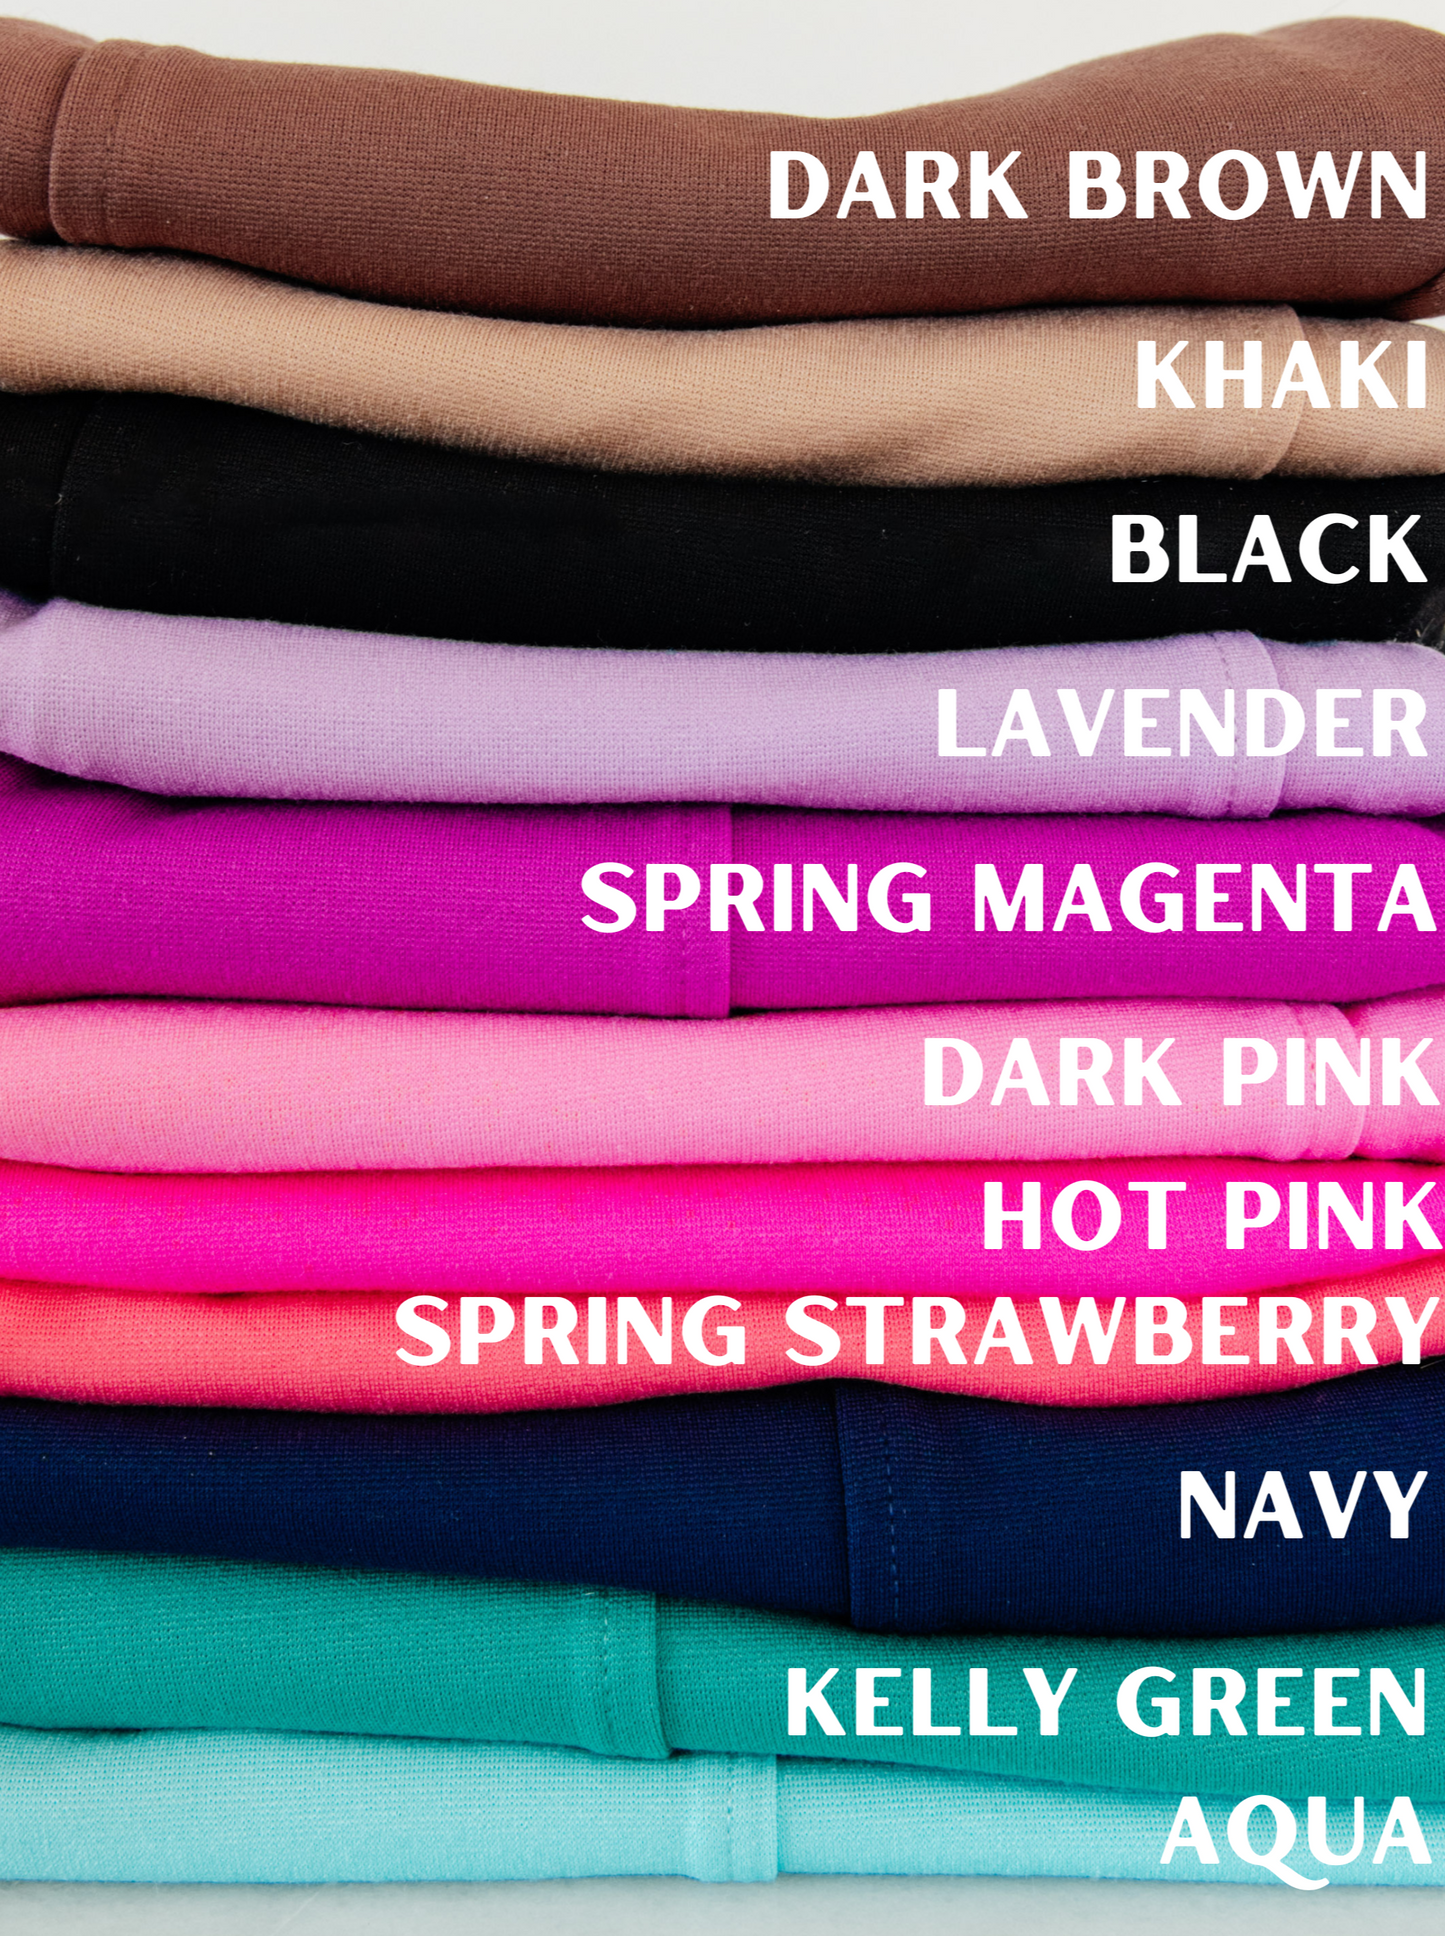 PREORDER: Magic Flare Pants in Eleven Colors (Online Exclusive)